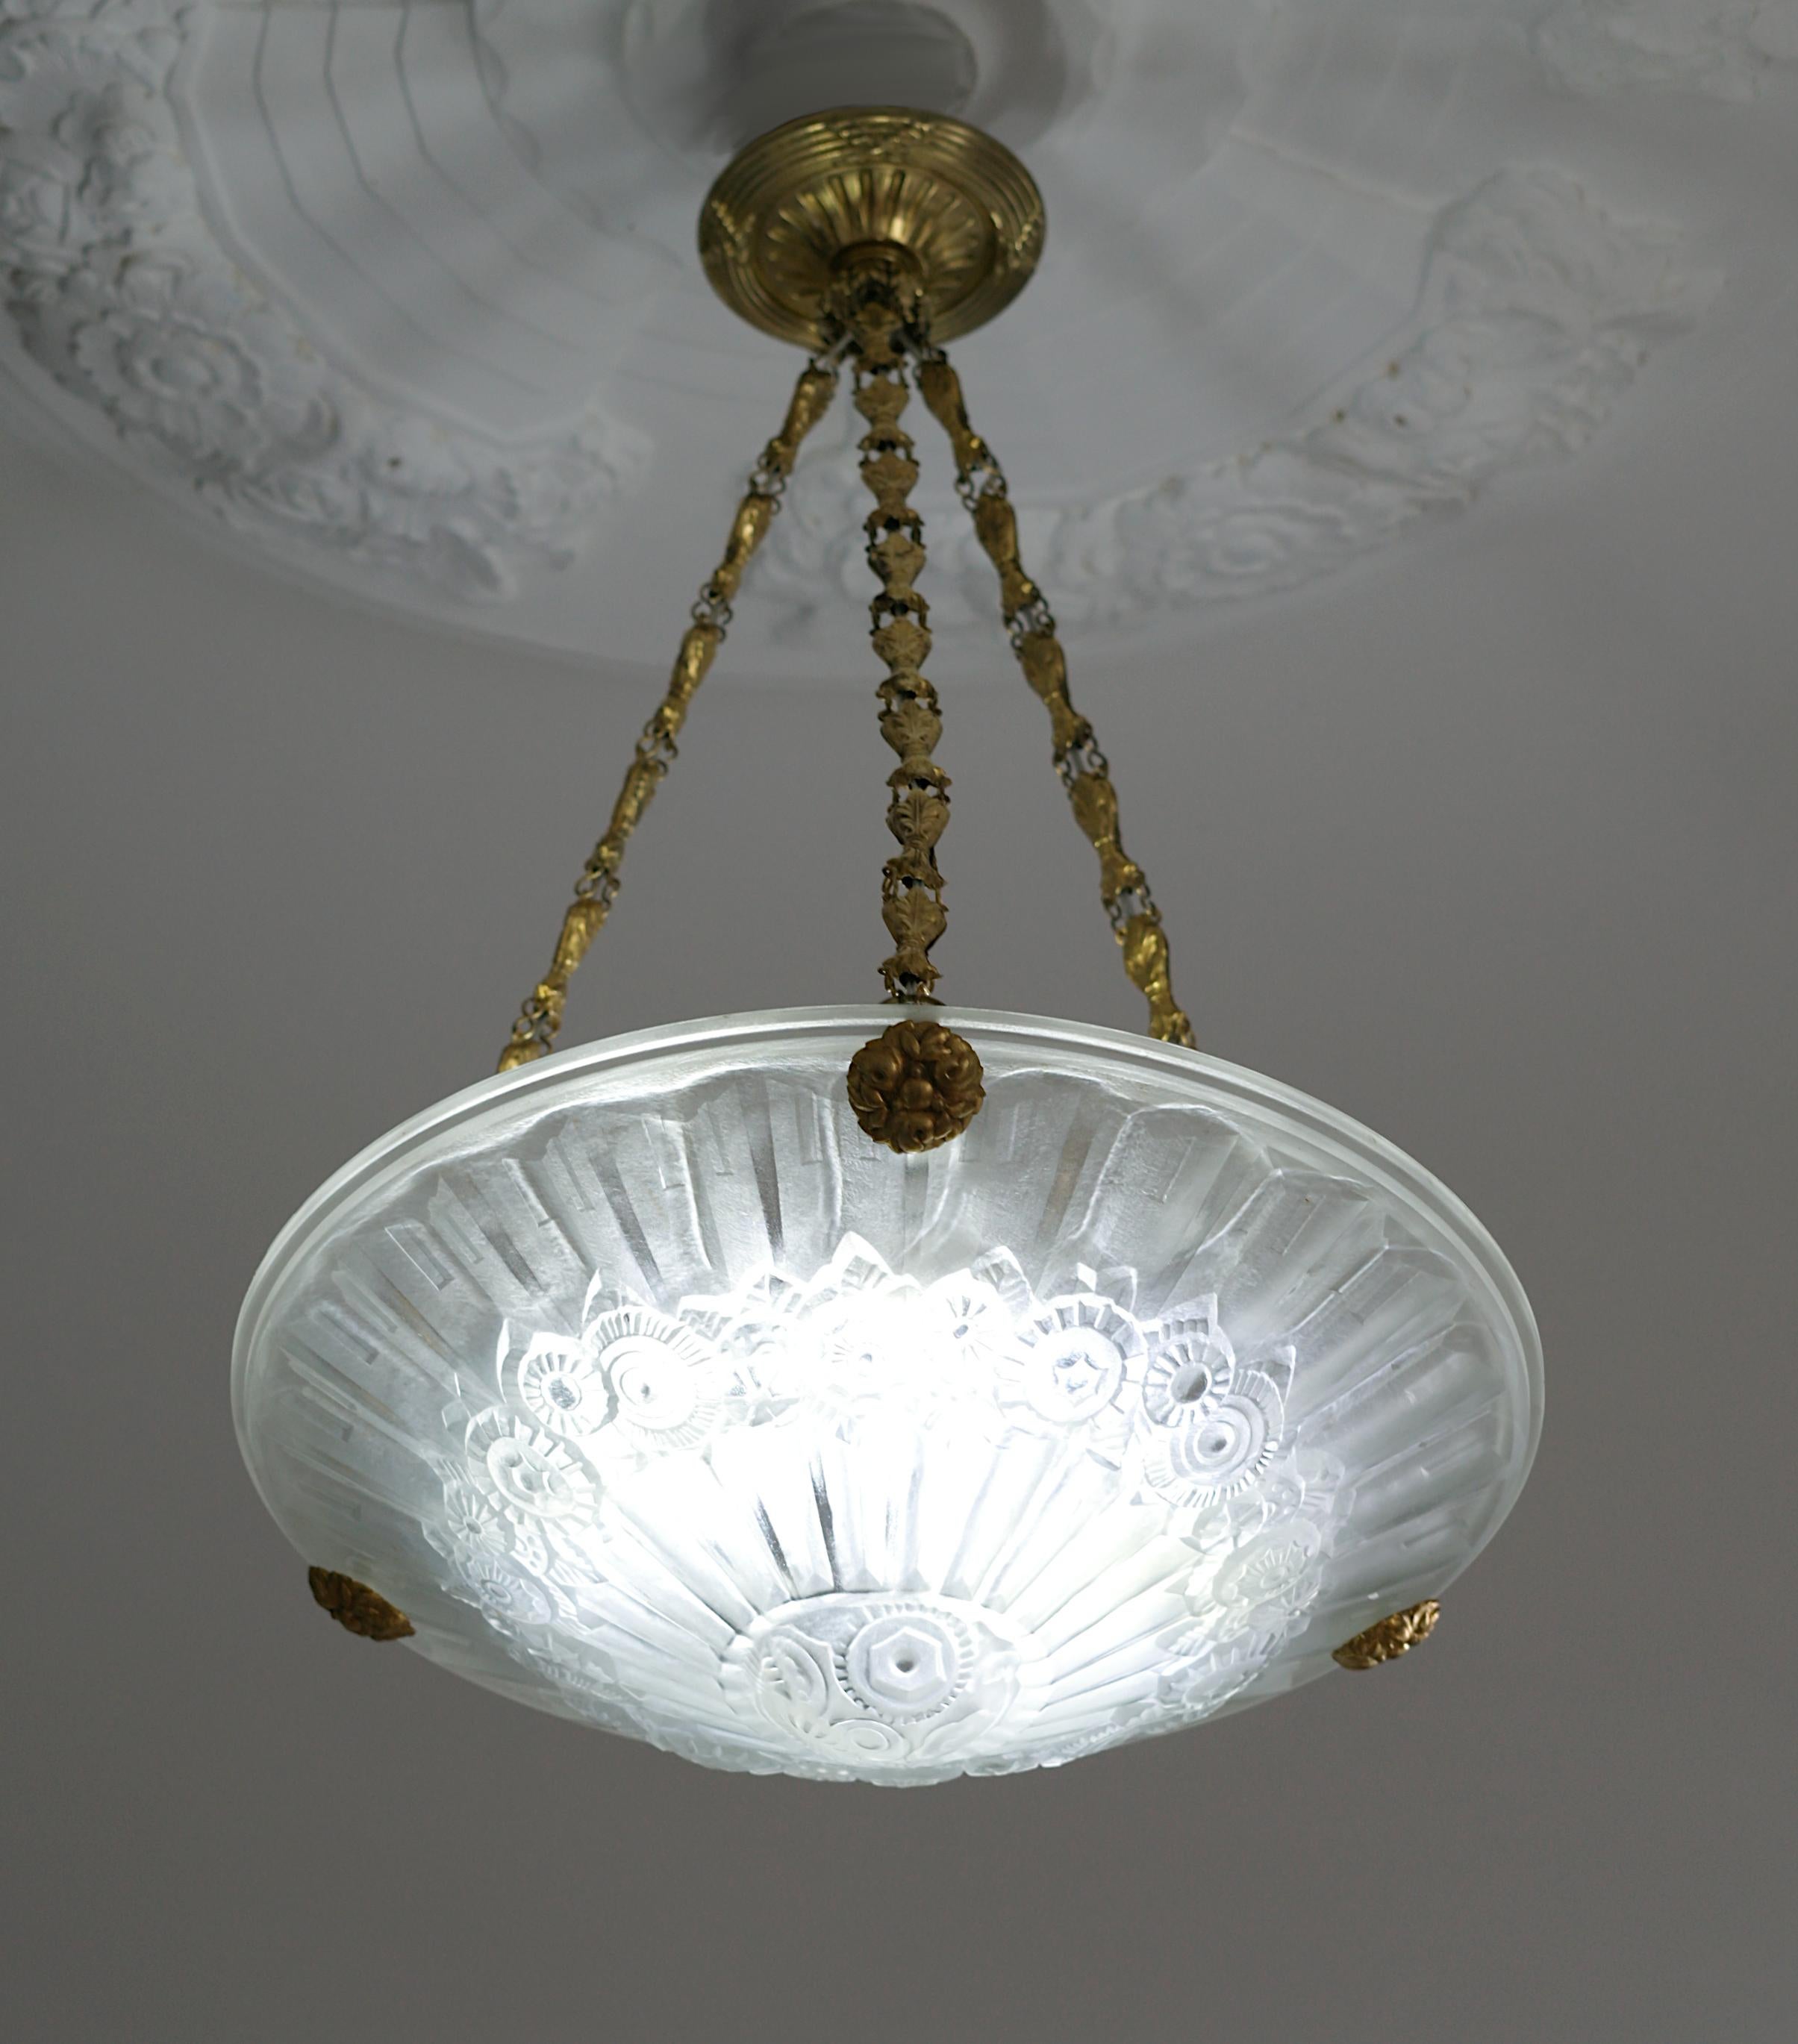 Jean Gauthier French Art Deco Pendant Chandelier, Late 1920s For Sale 2